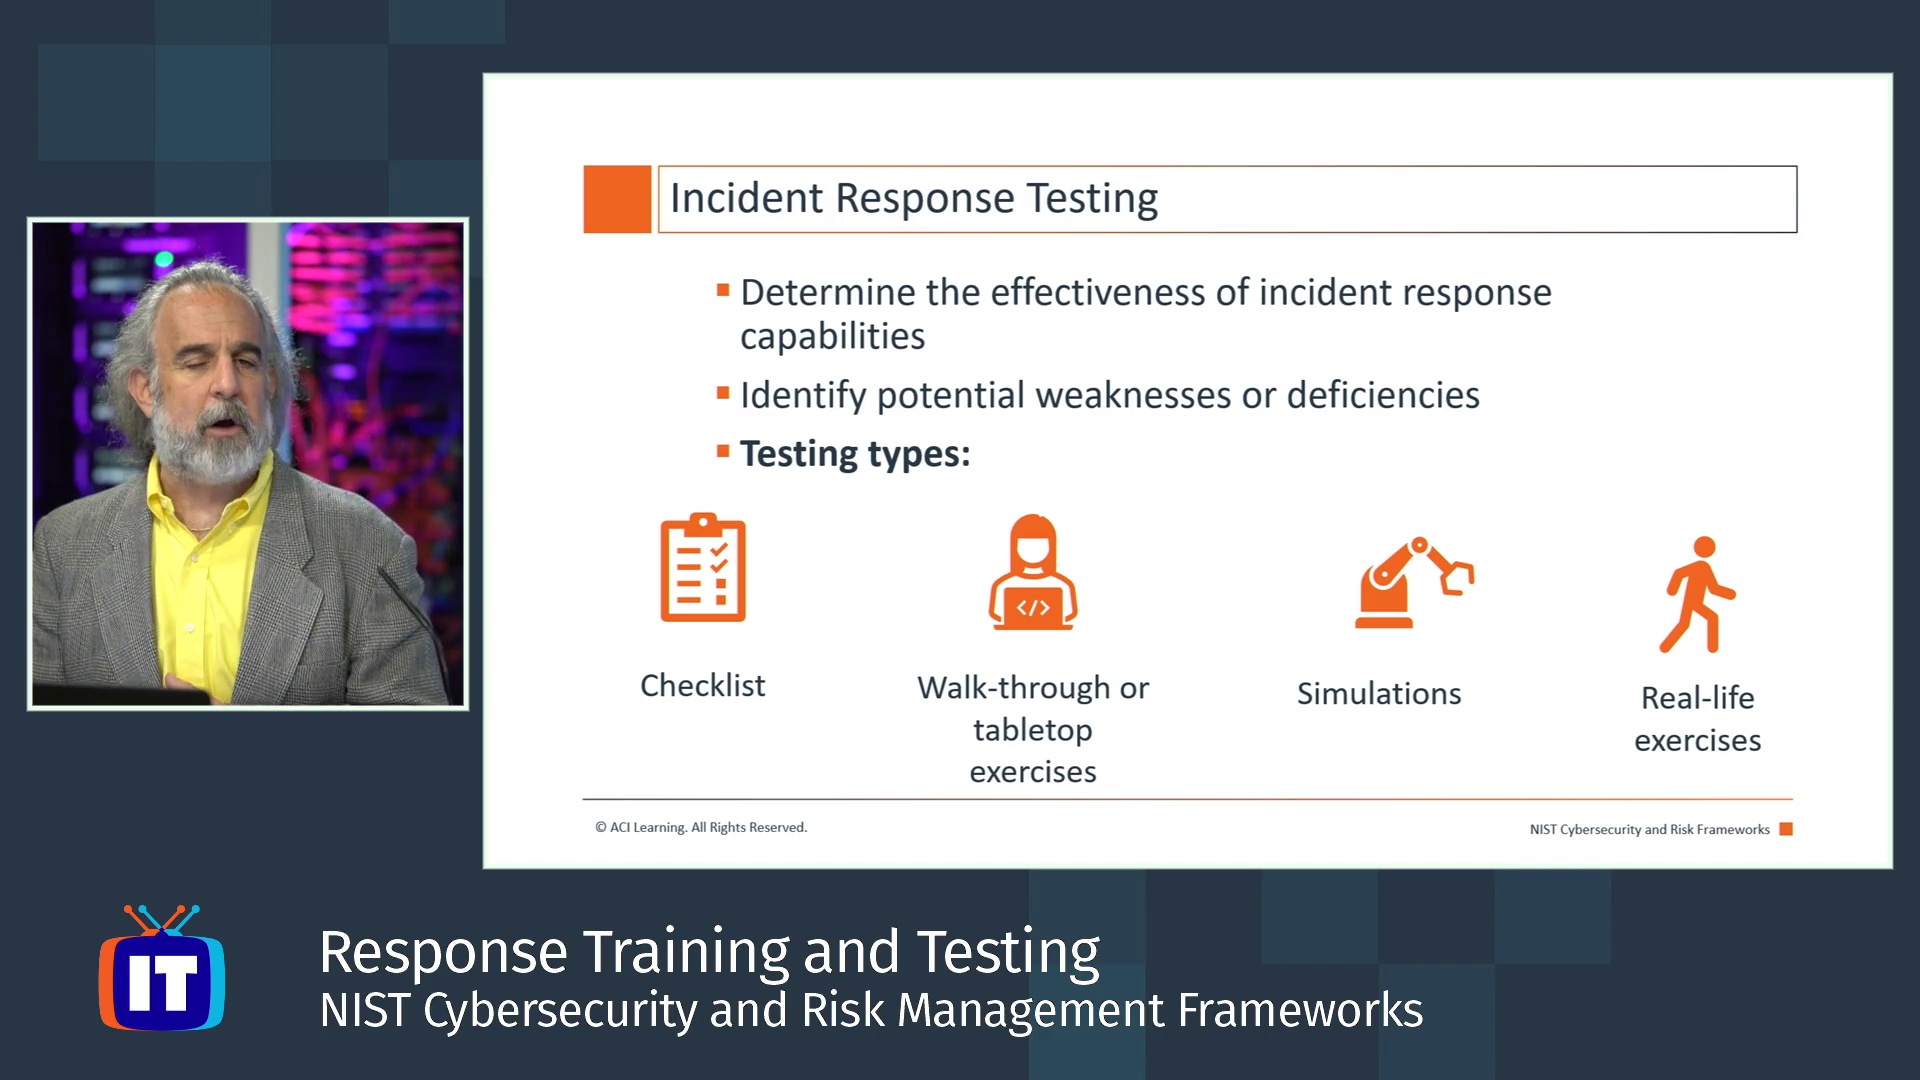 NIST Cybersecurity and Risk Management Frameworks